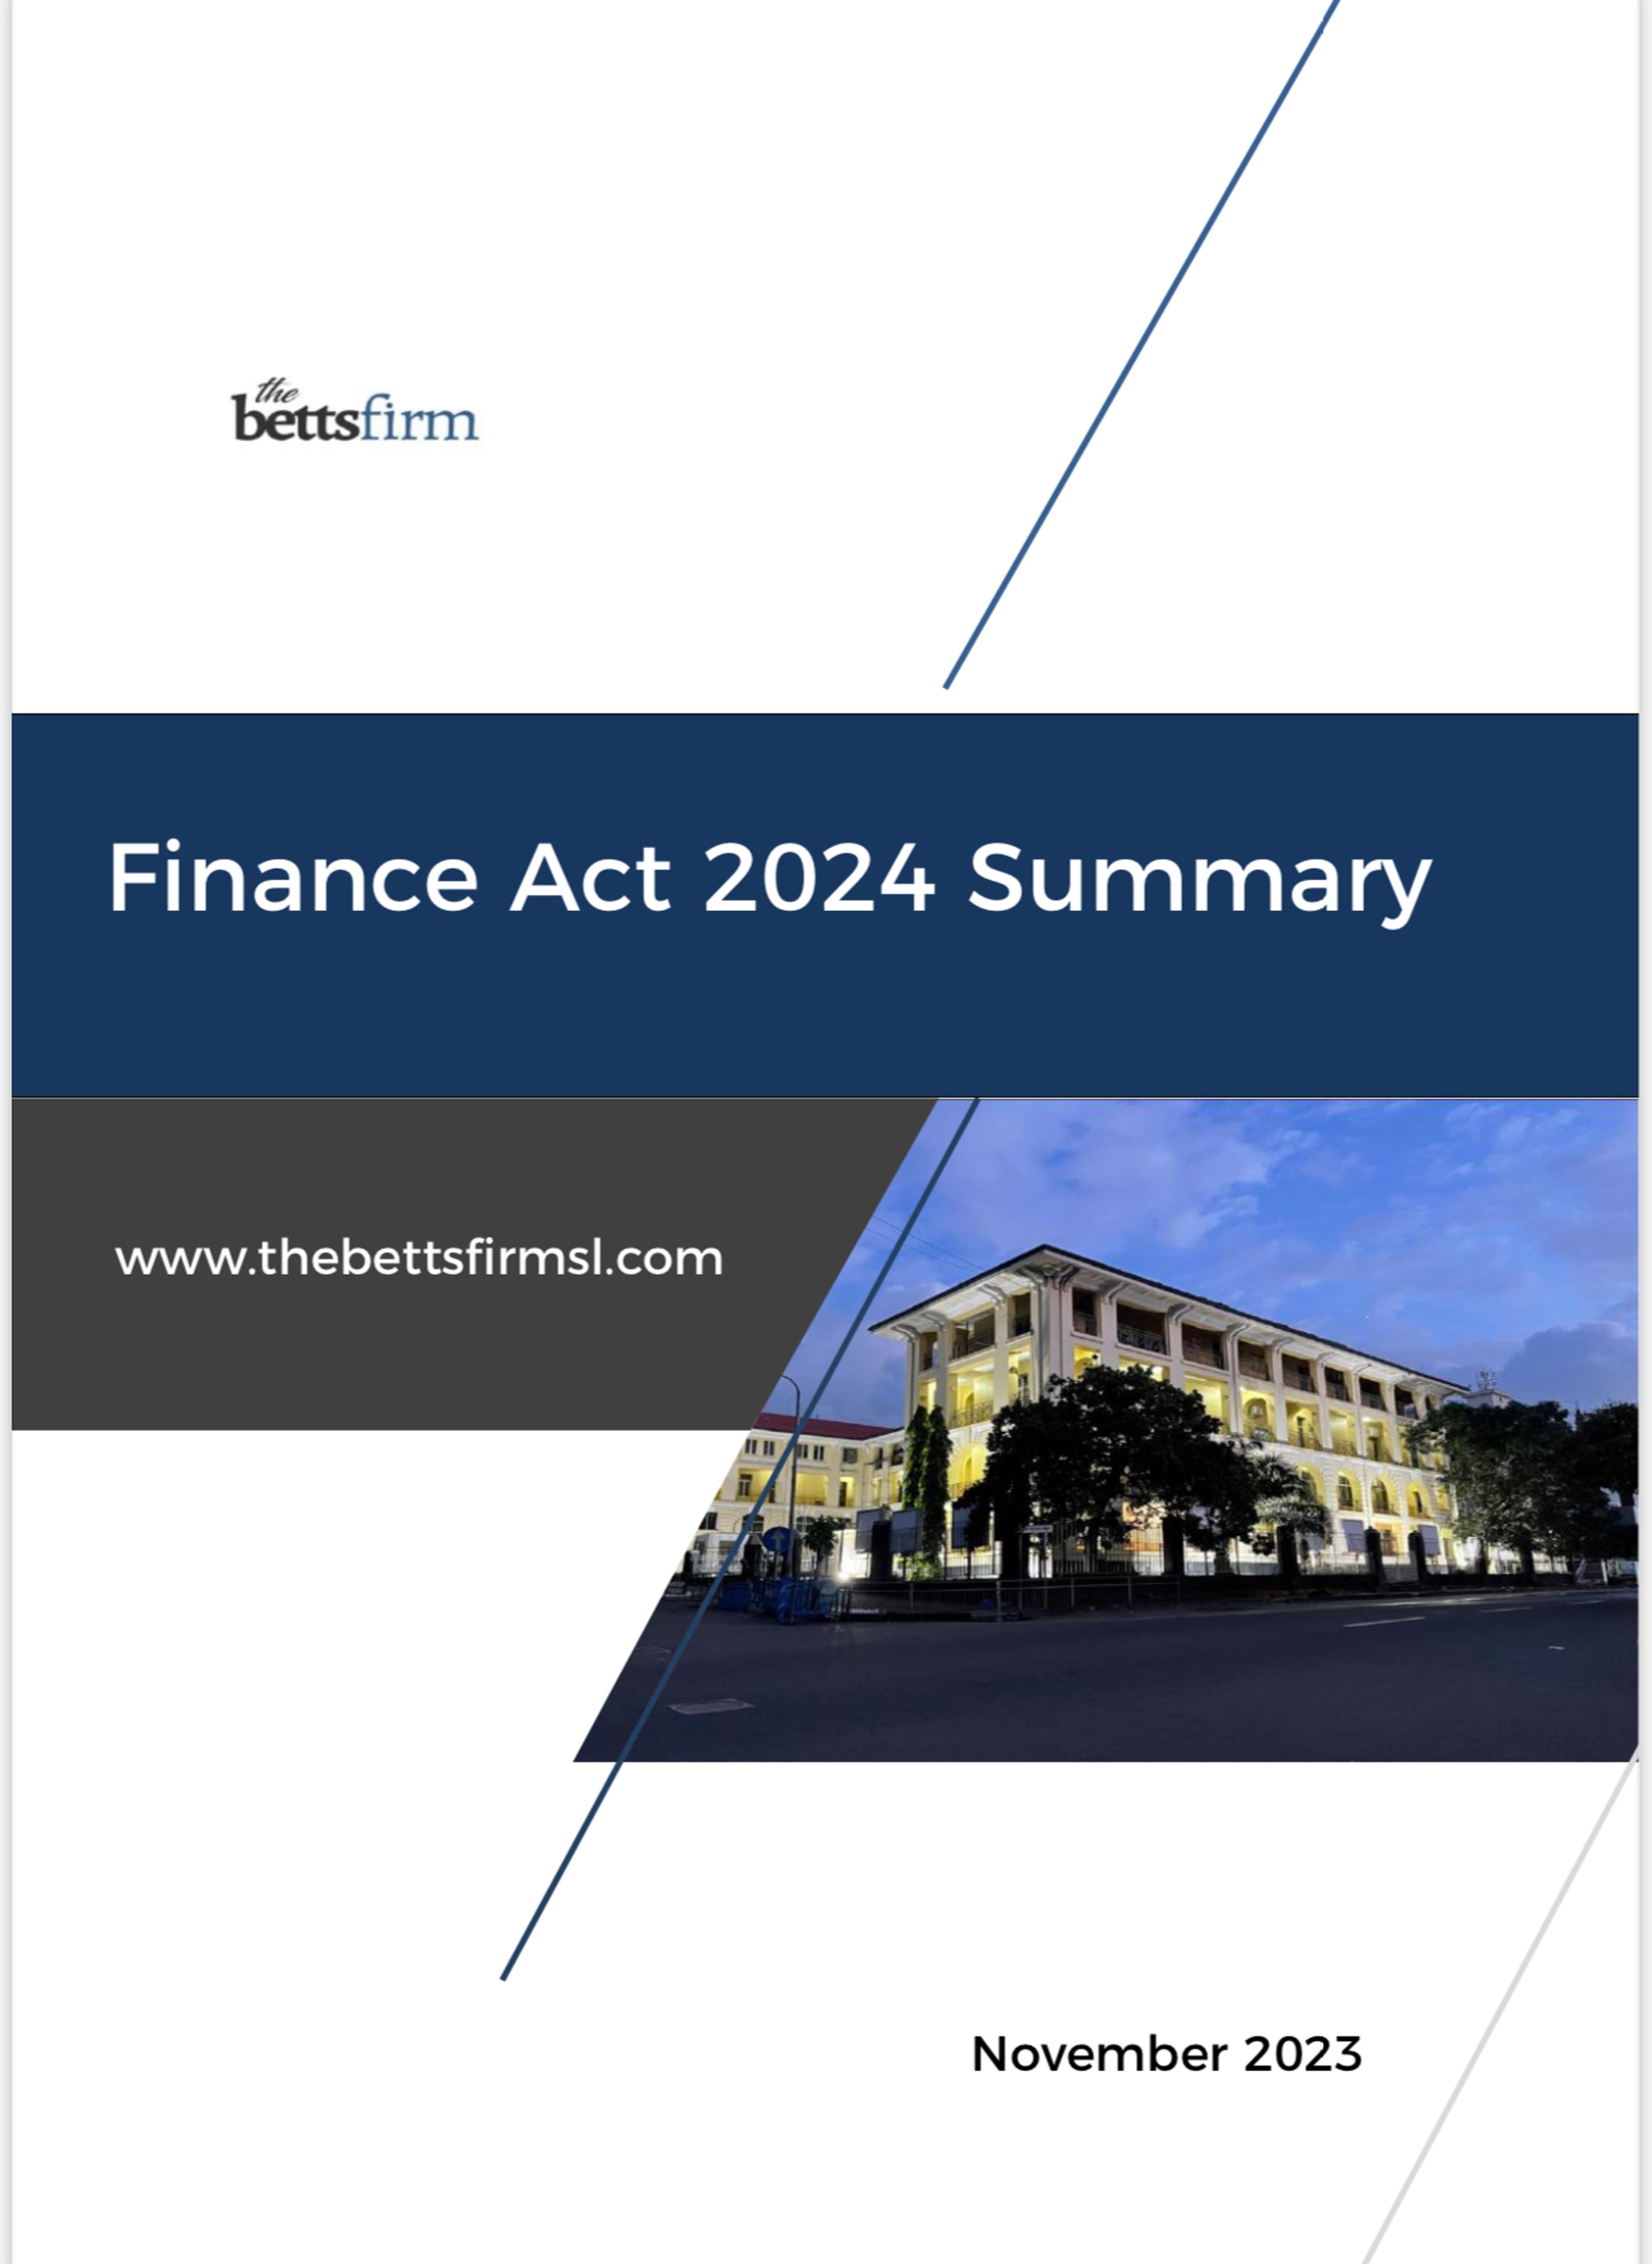 The Betts Firm's Summary of The Finance Act 2024 